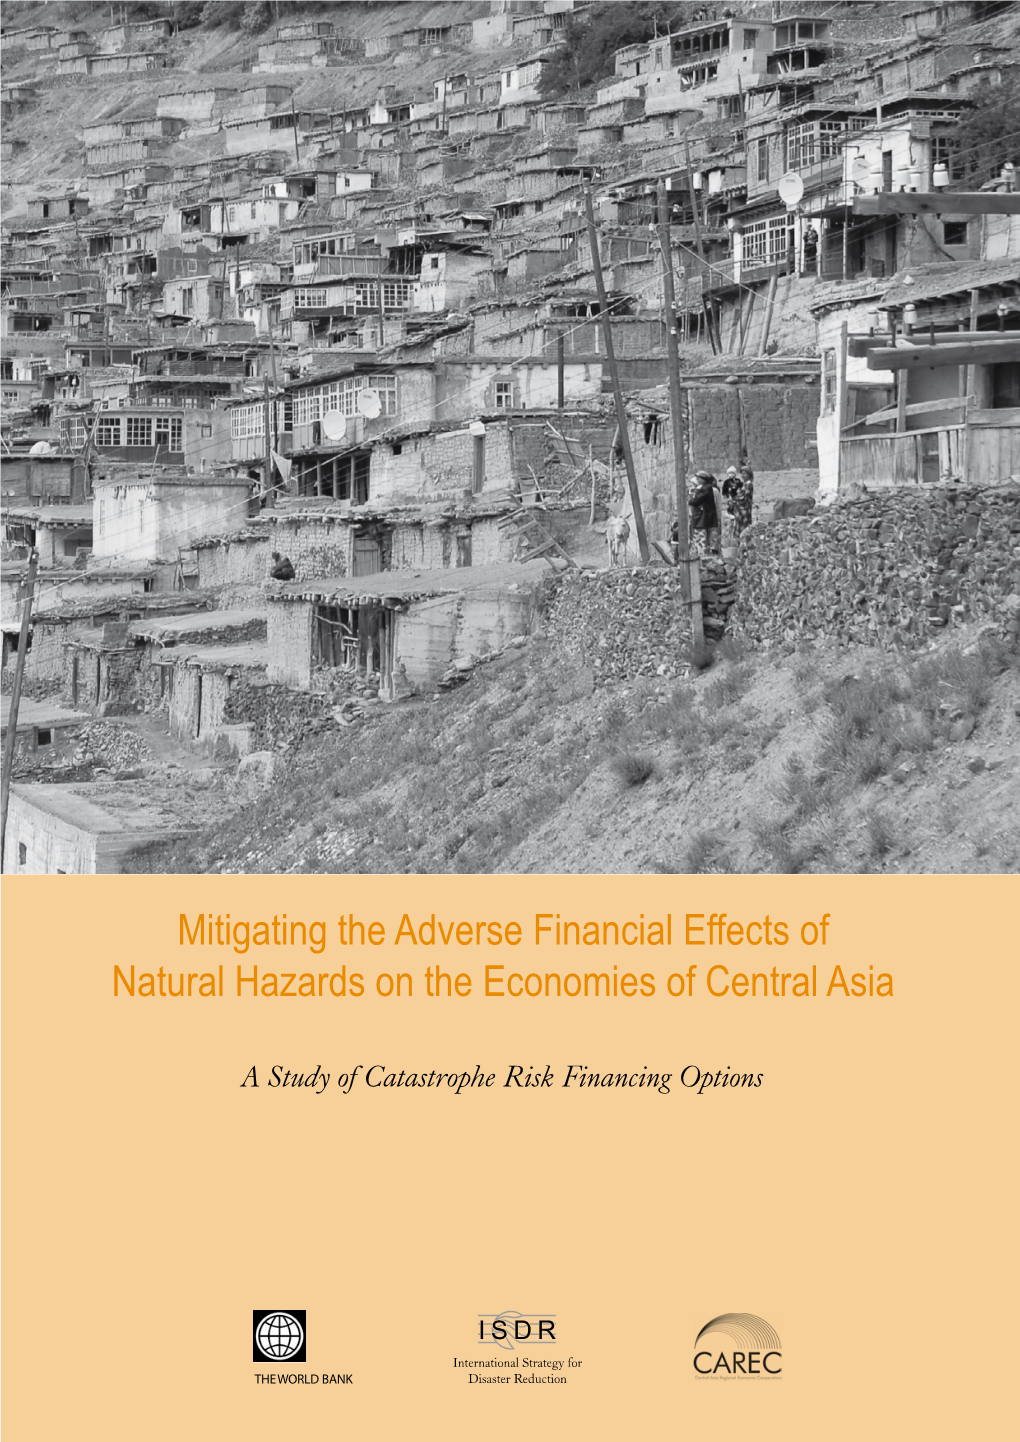 Mitigating the Adverse Financial Effects of Natural Hazards on the Economies of Central Asia